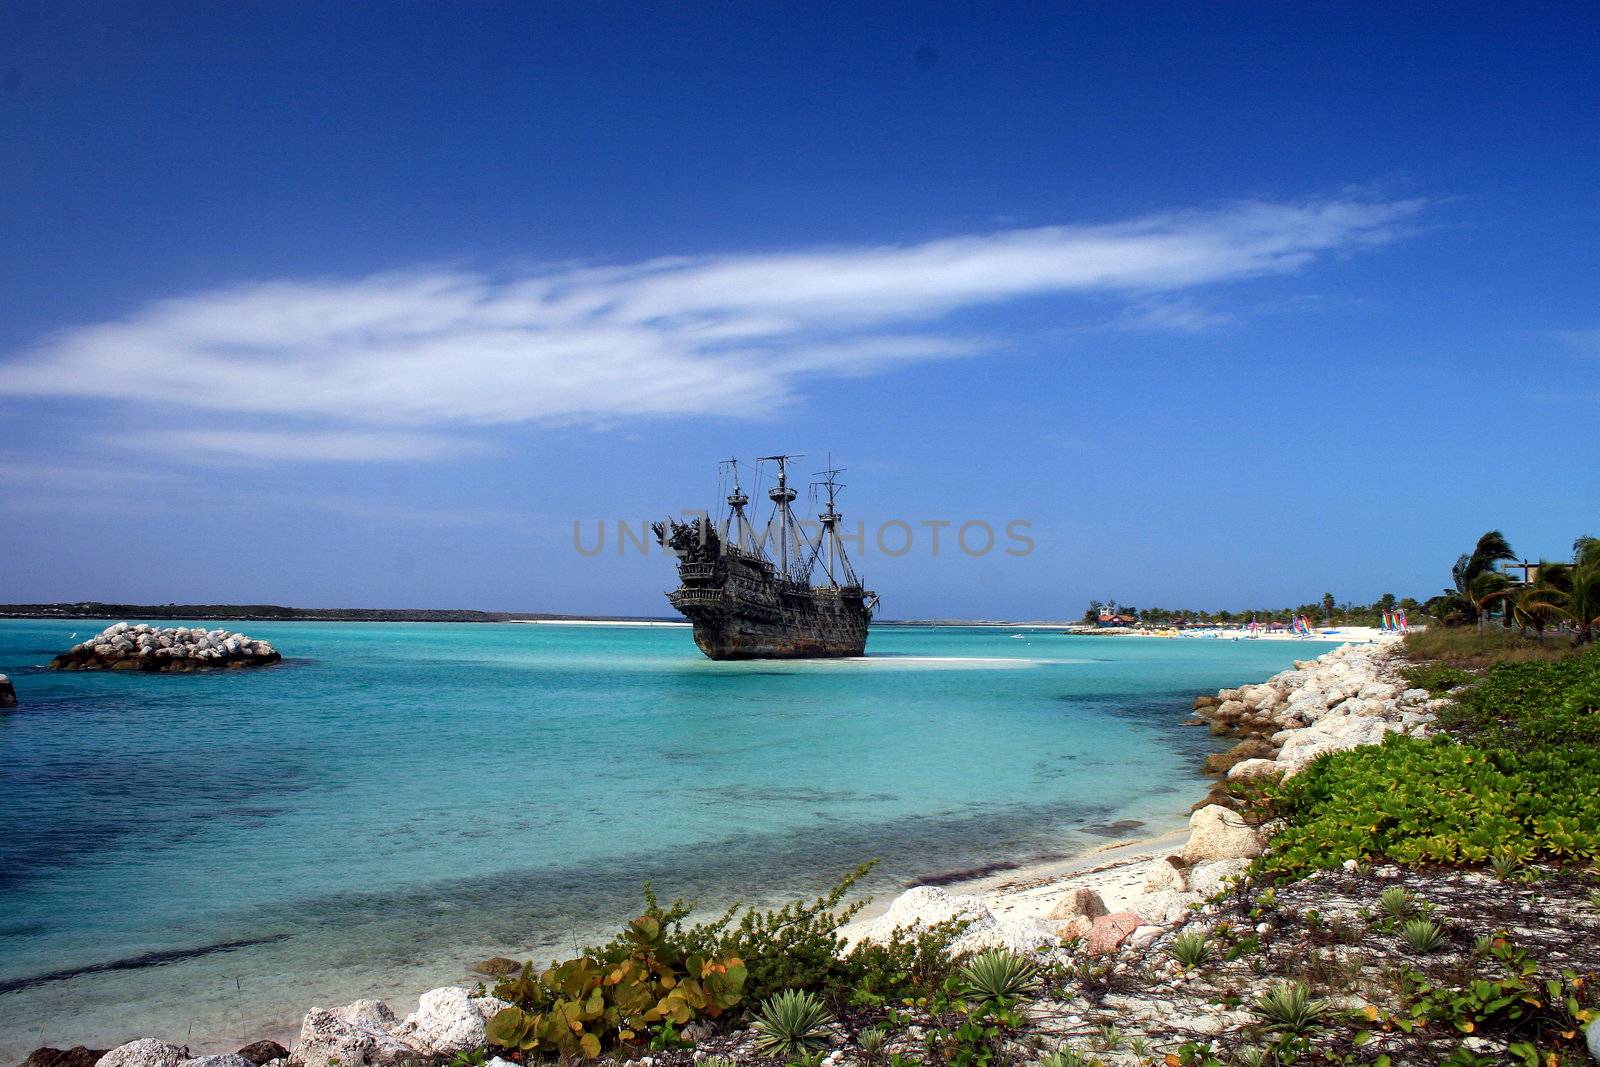 A replica of an old ship in the Caribbean